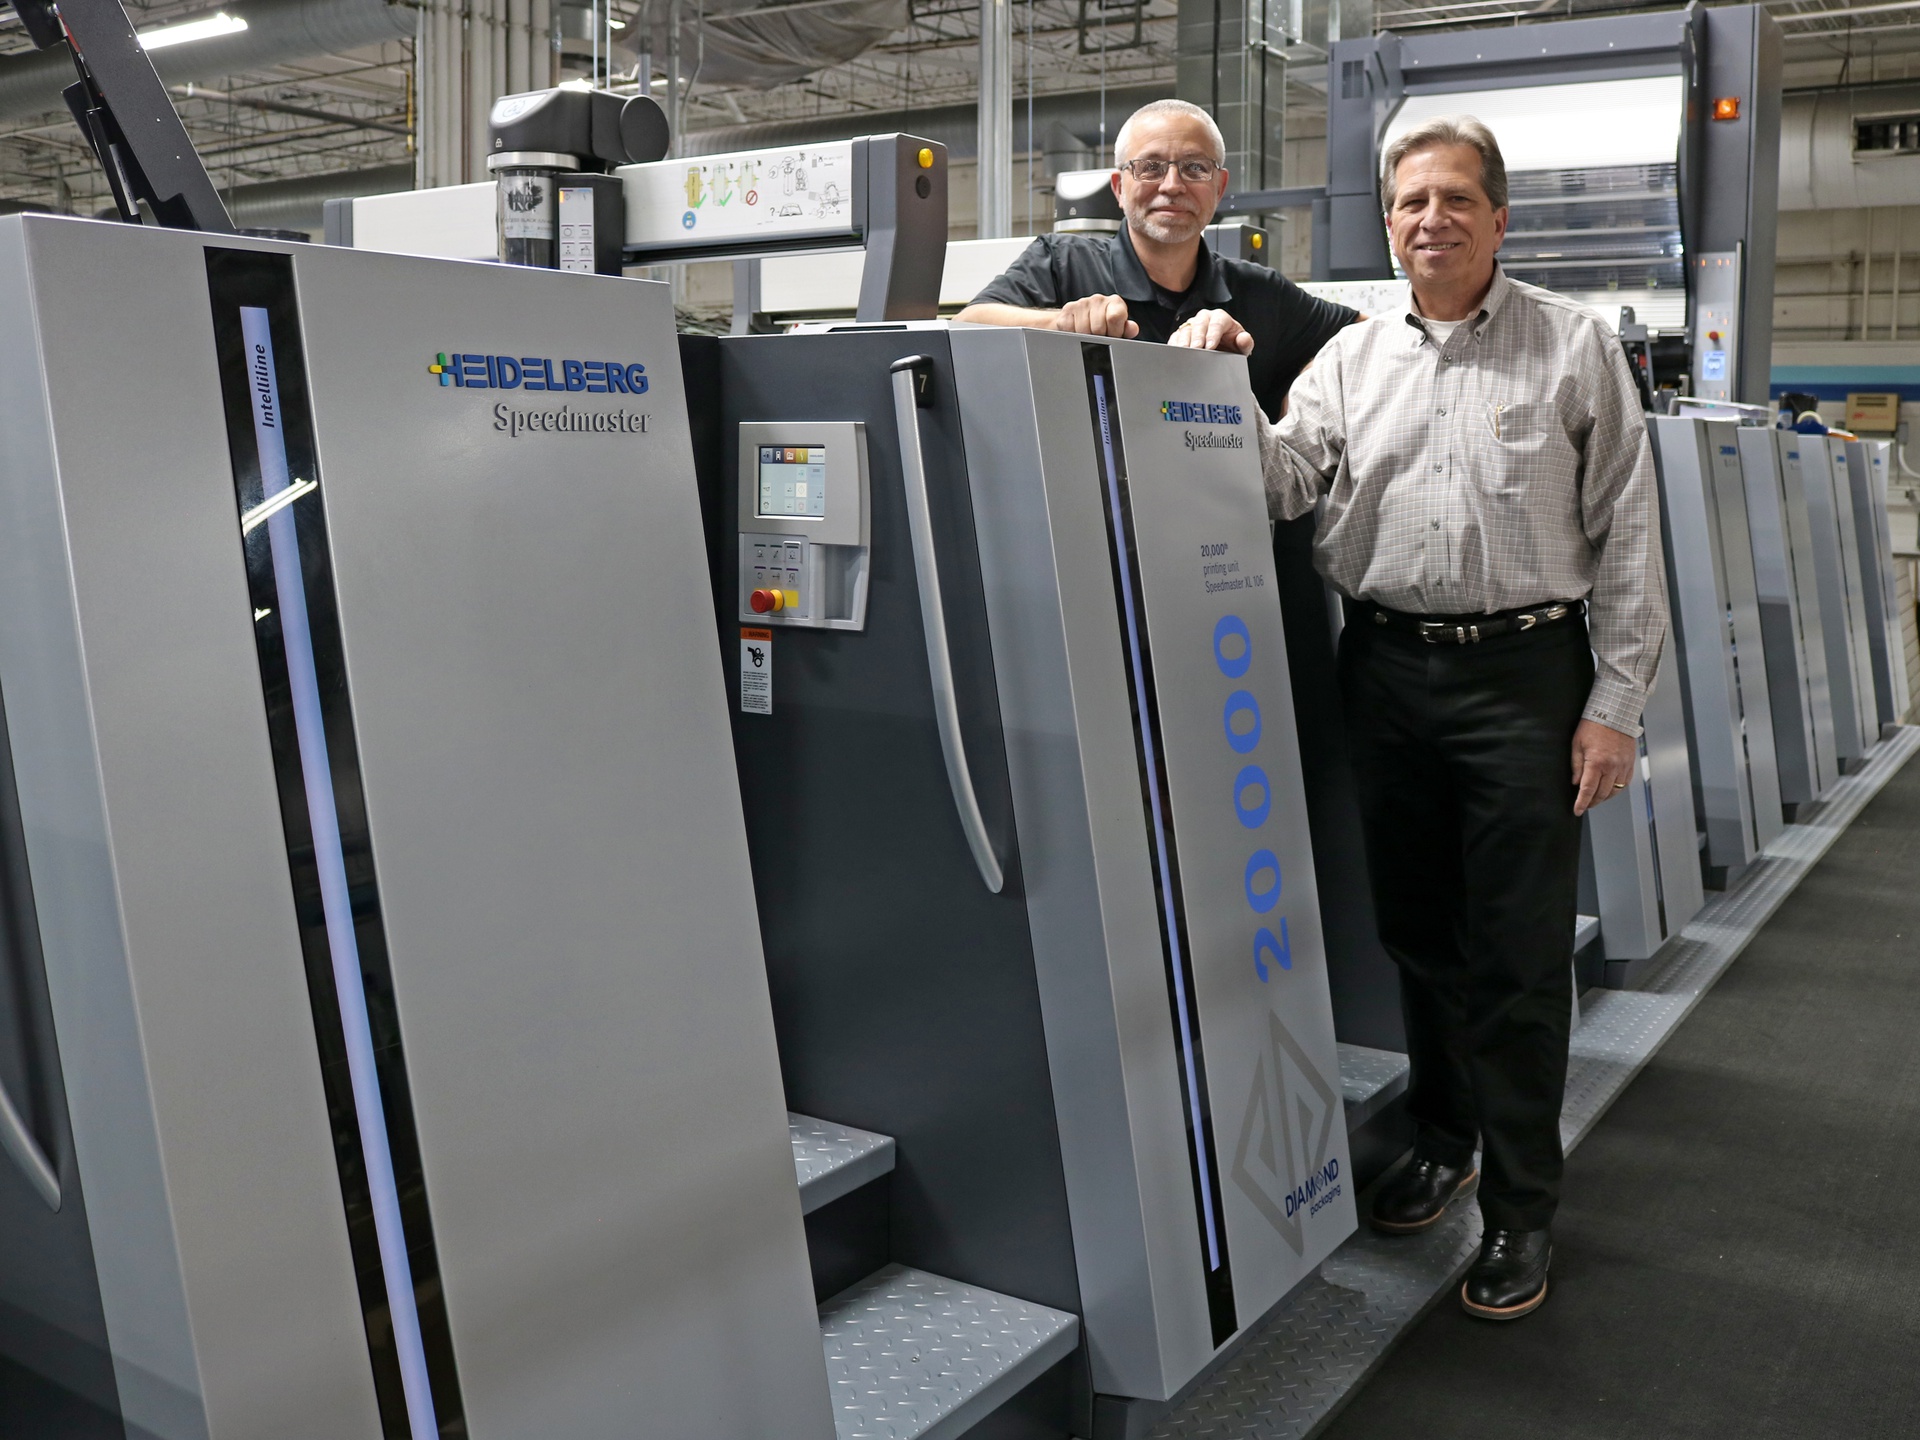 Diamond's new Heidelberg Speedmaster XL 106 offset press is specially designed to meet the demands of today’s Consumer Packaged Goods (CPG) companies.